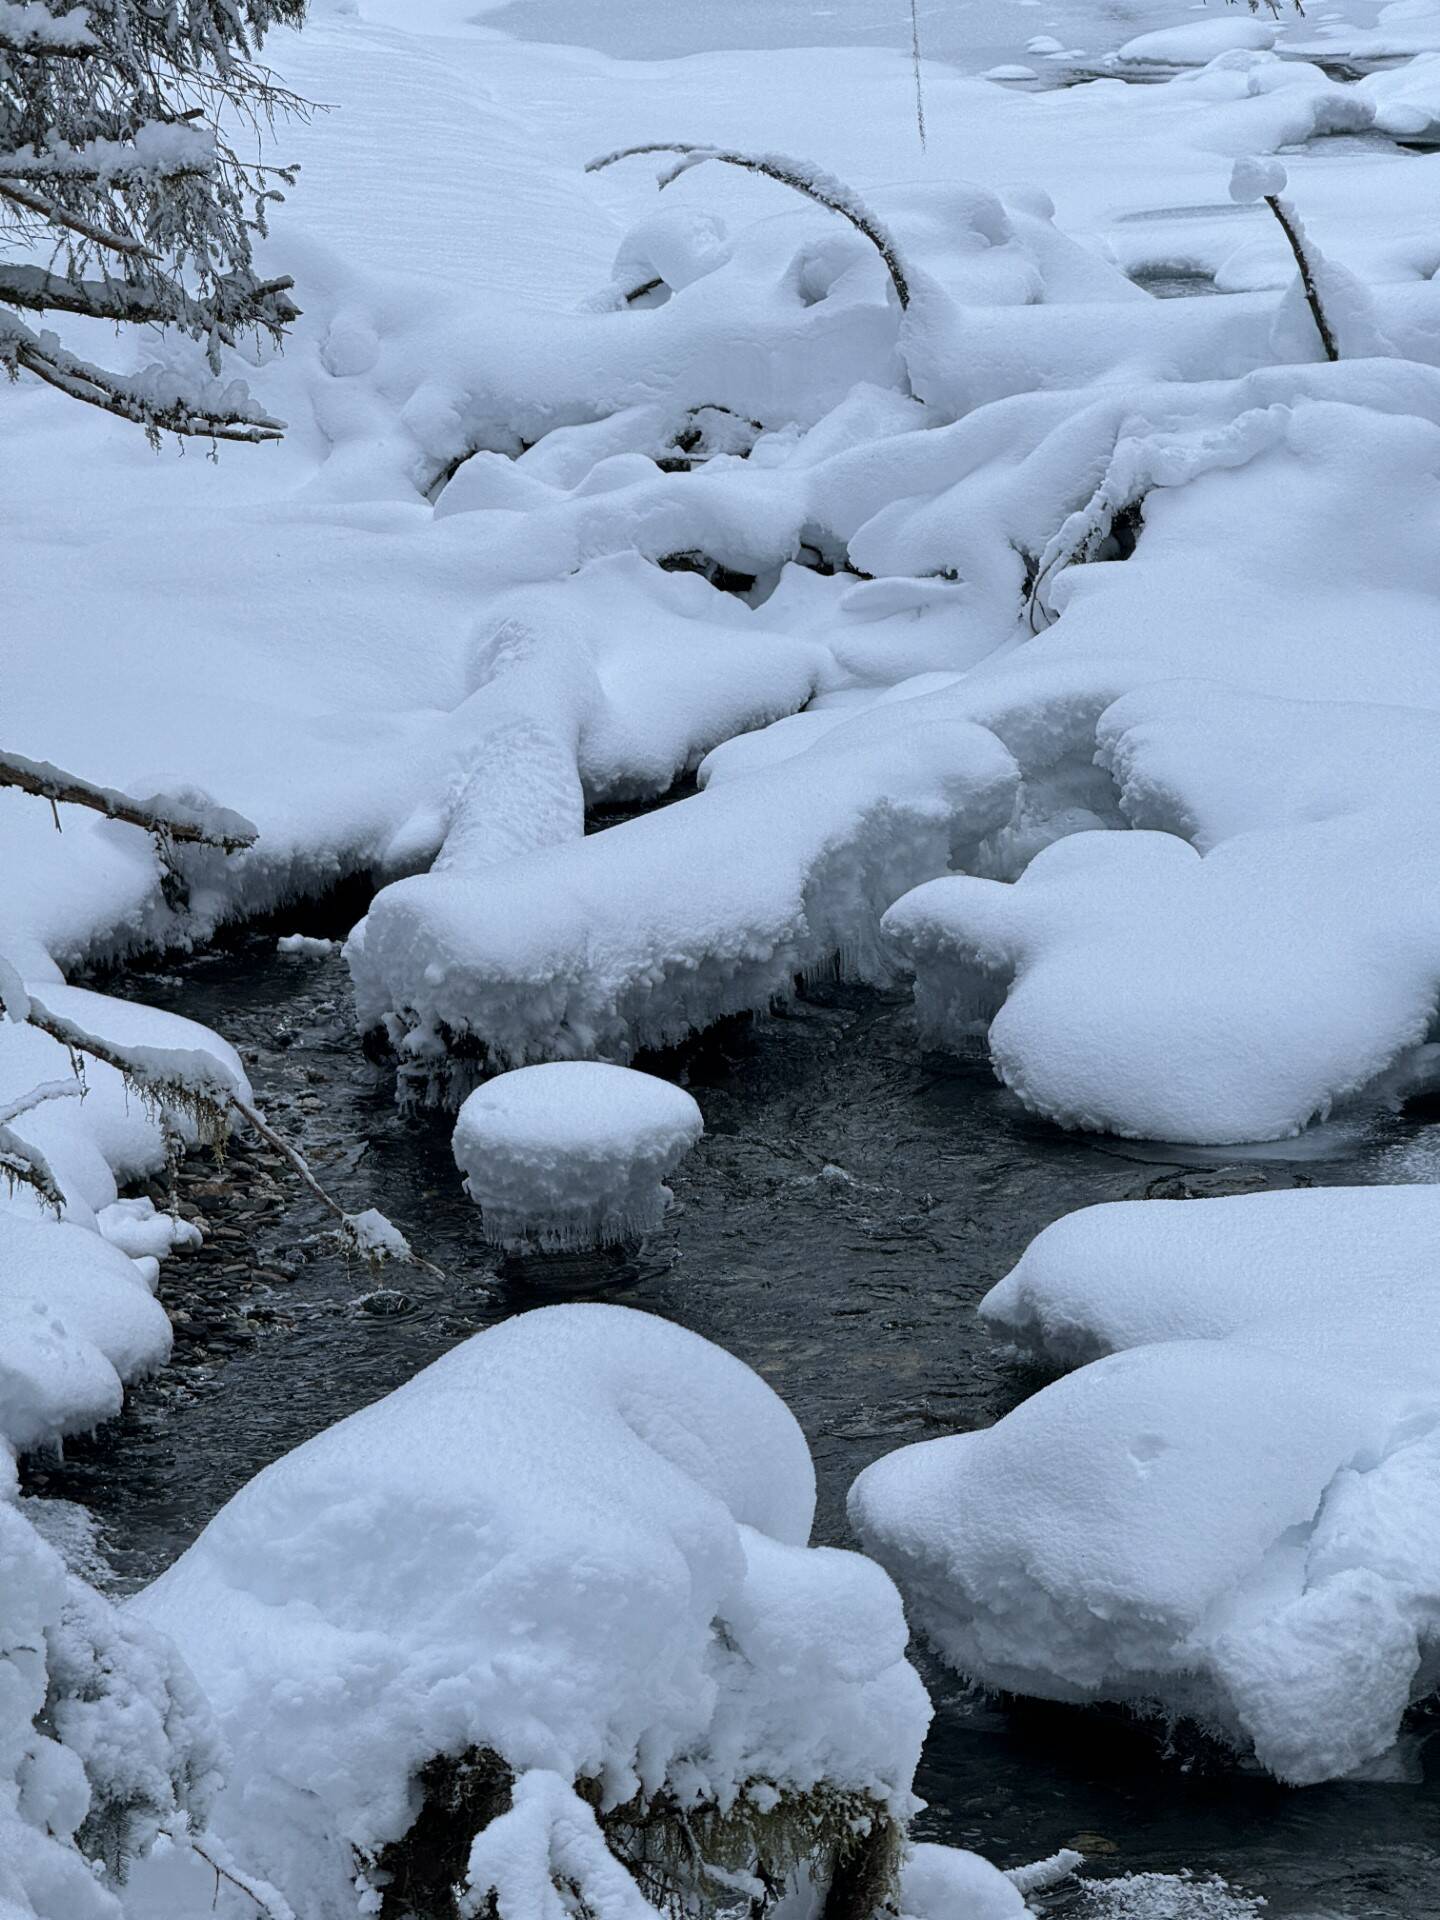 Snow makes a mystery of what’s safe to cross in the stream along the Montana Creek Trail on Jan. 21. (Photo by Deana Barajas)